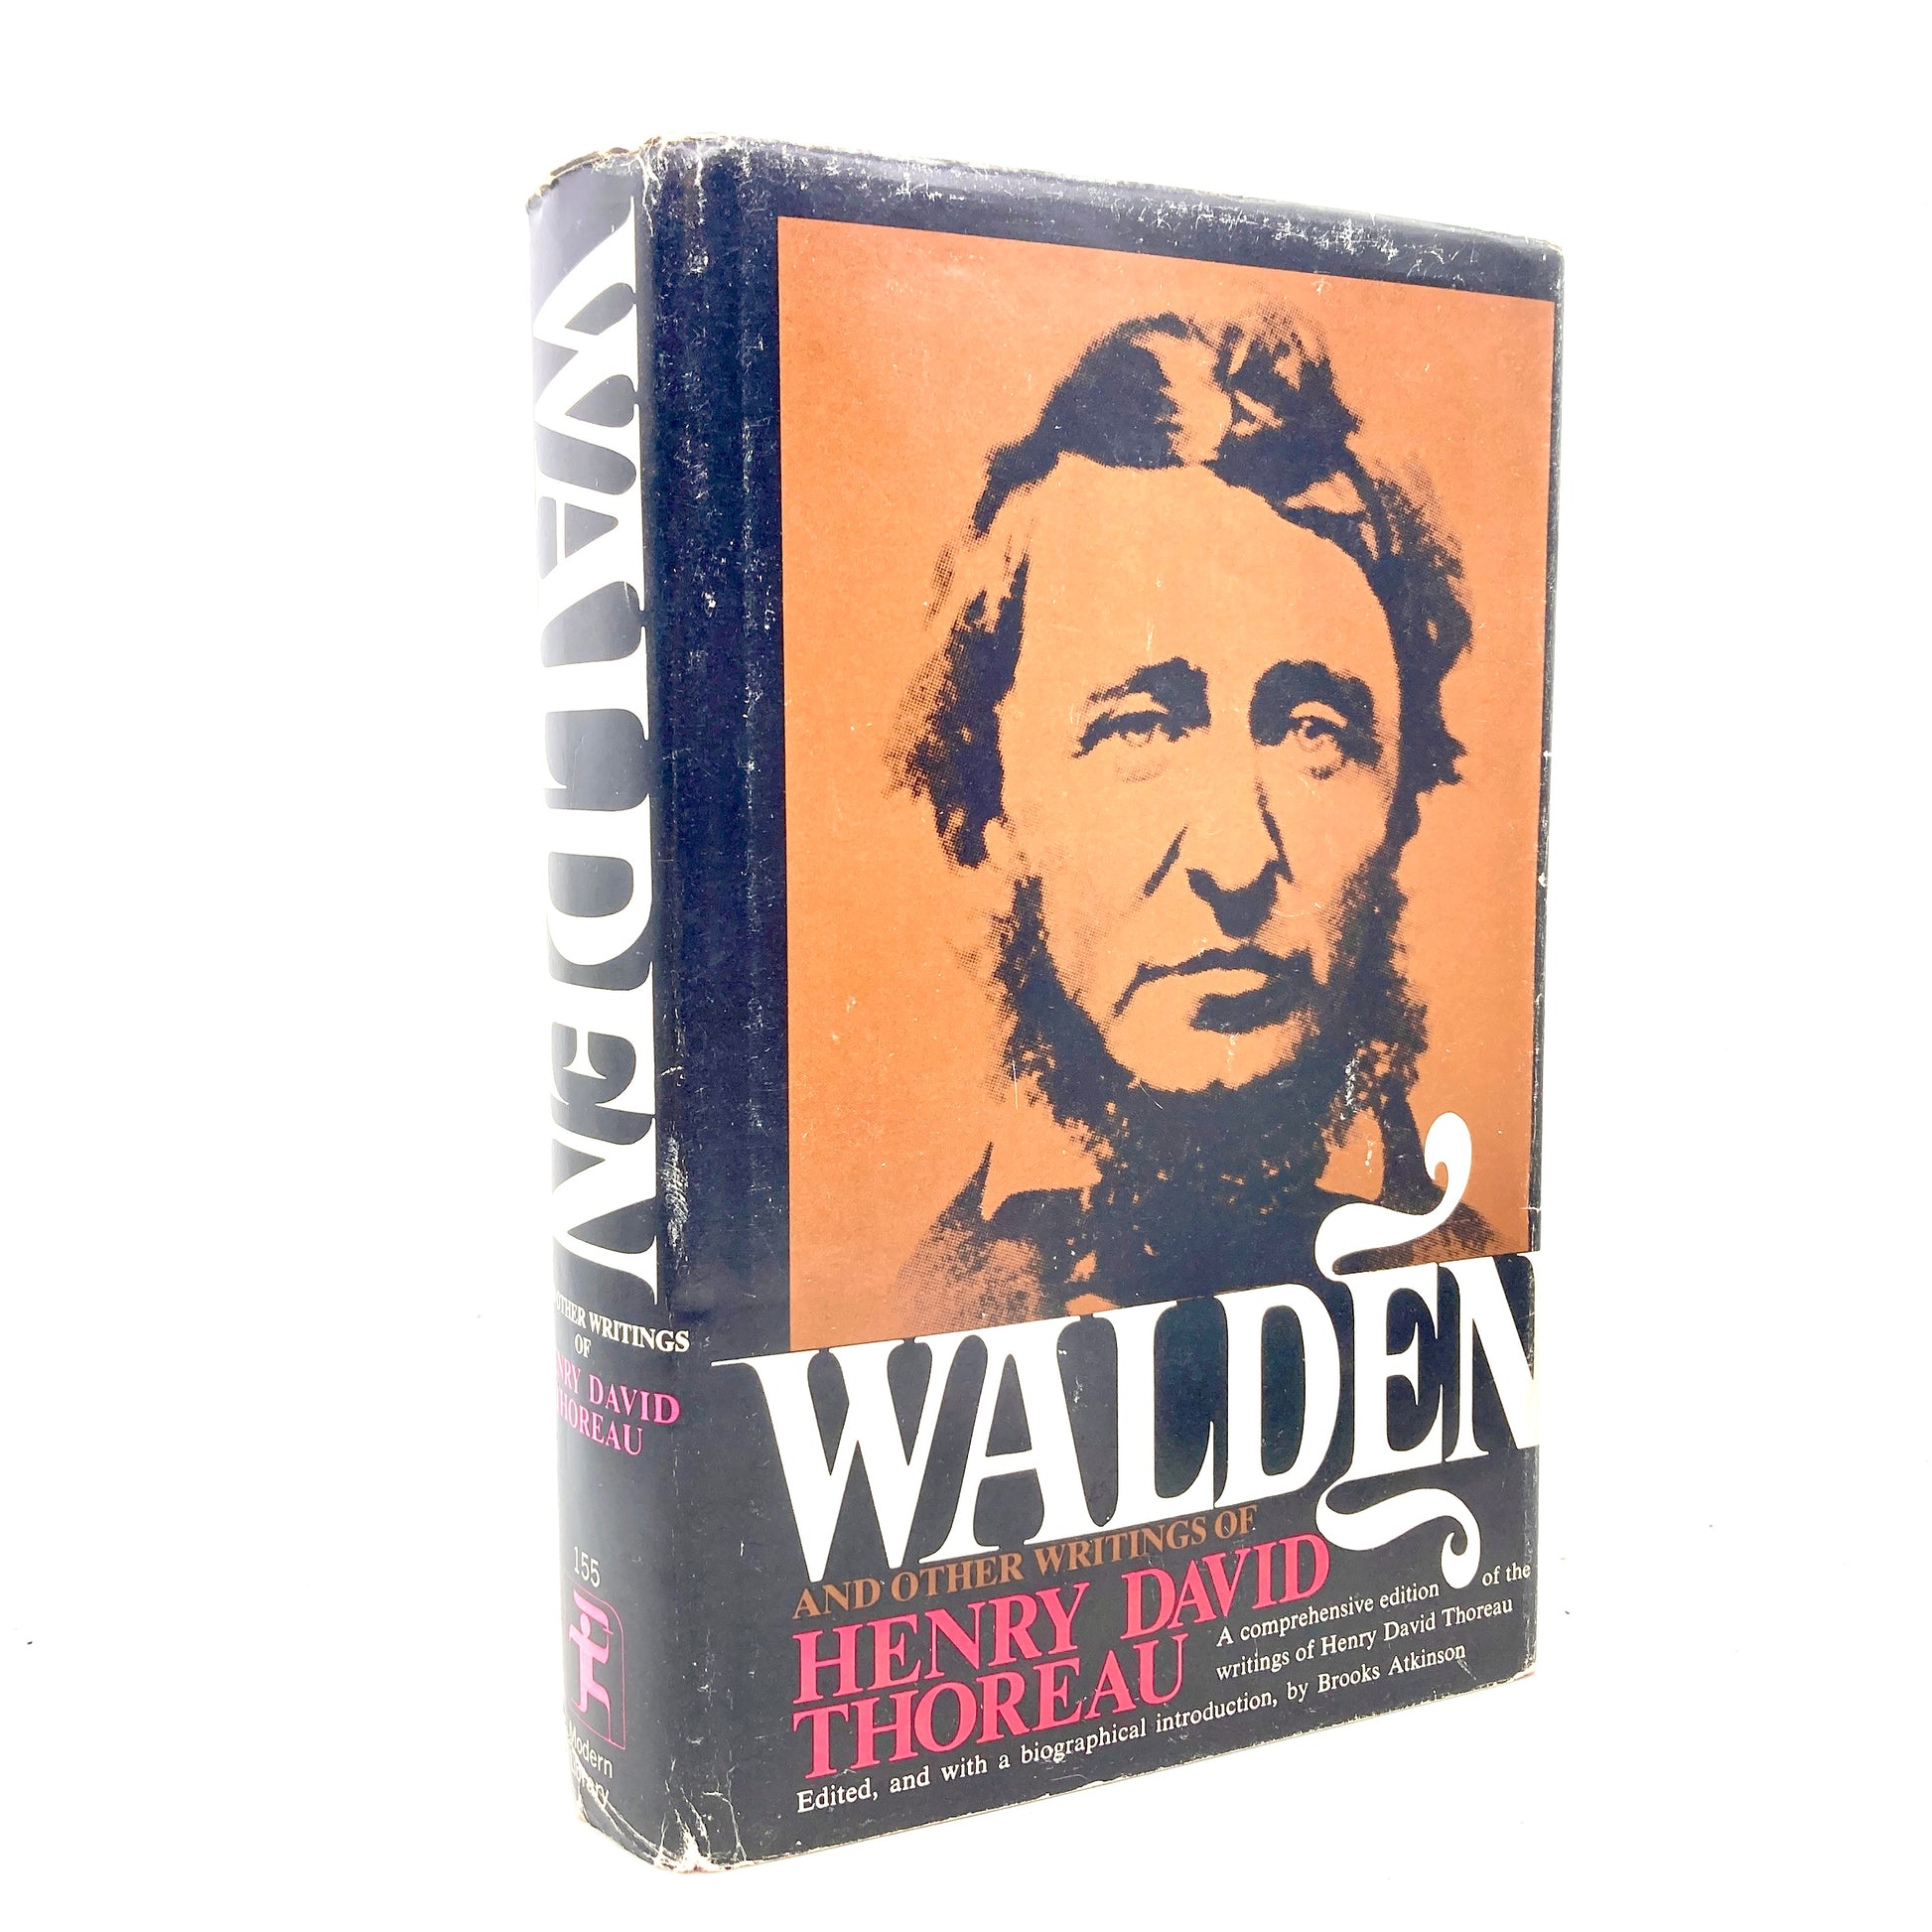 THOREAU, Henry David "Walden and Other Writings" [Modern Library, 1965] - Buzz Bookstore